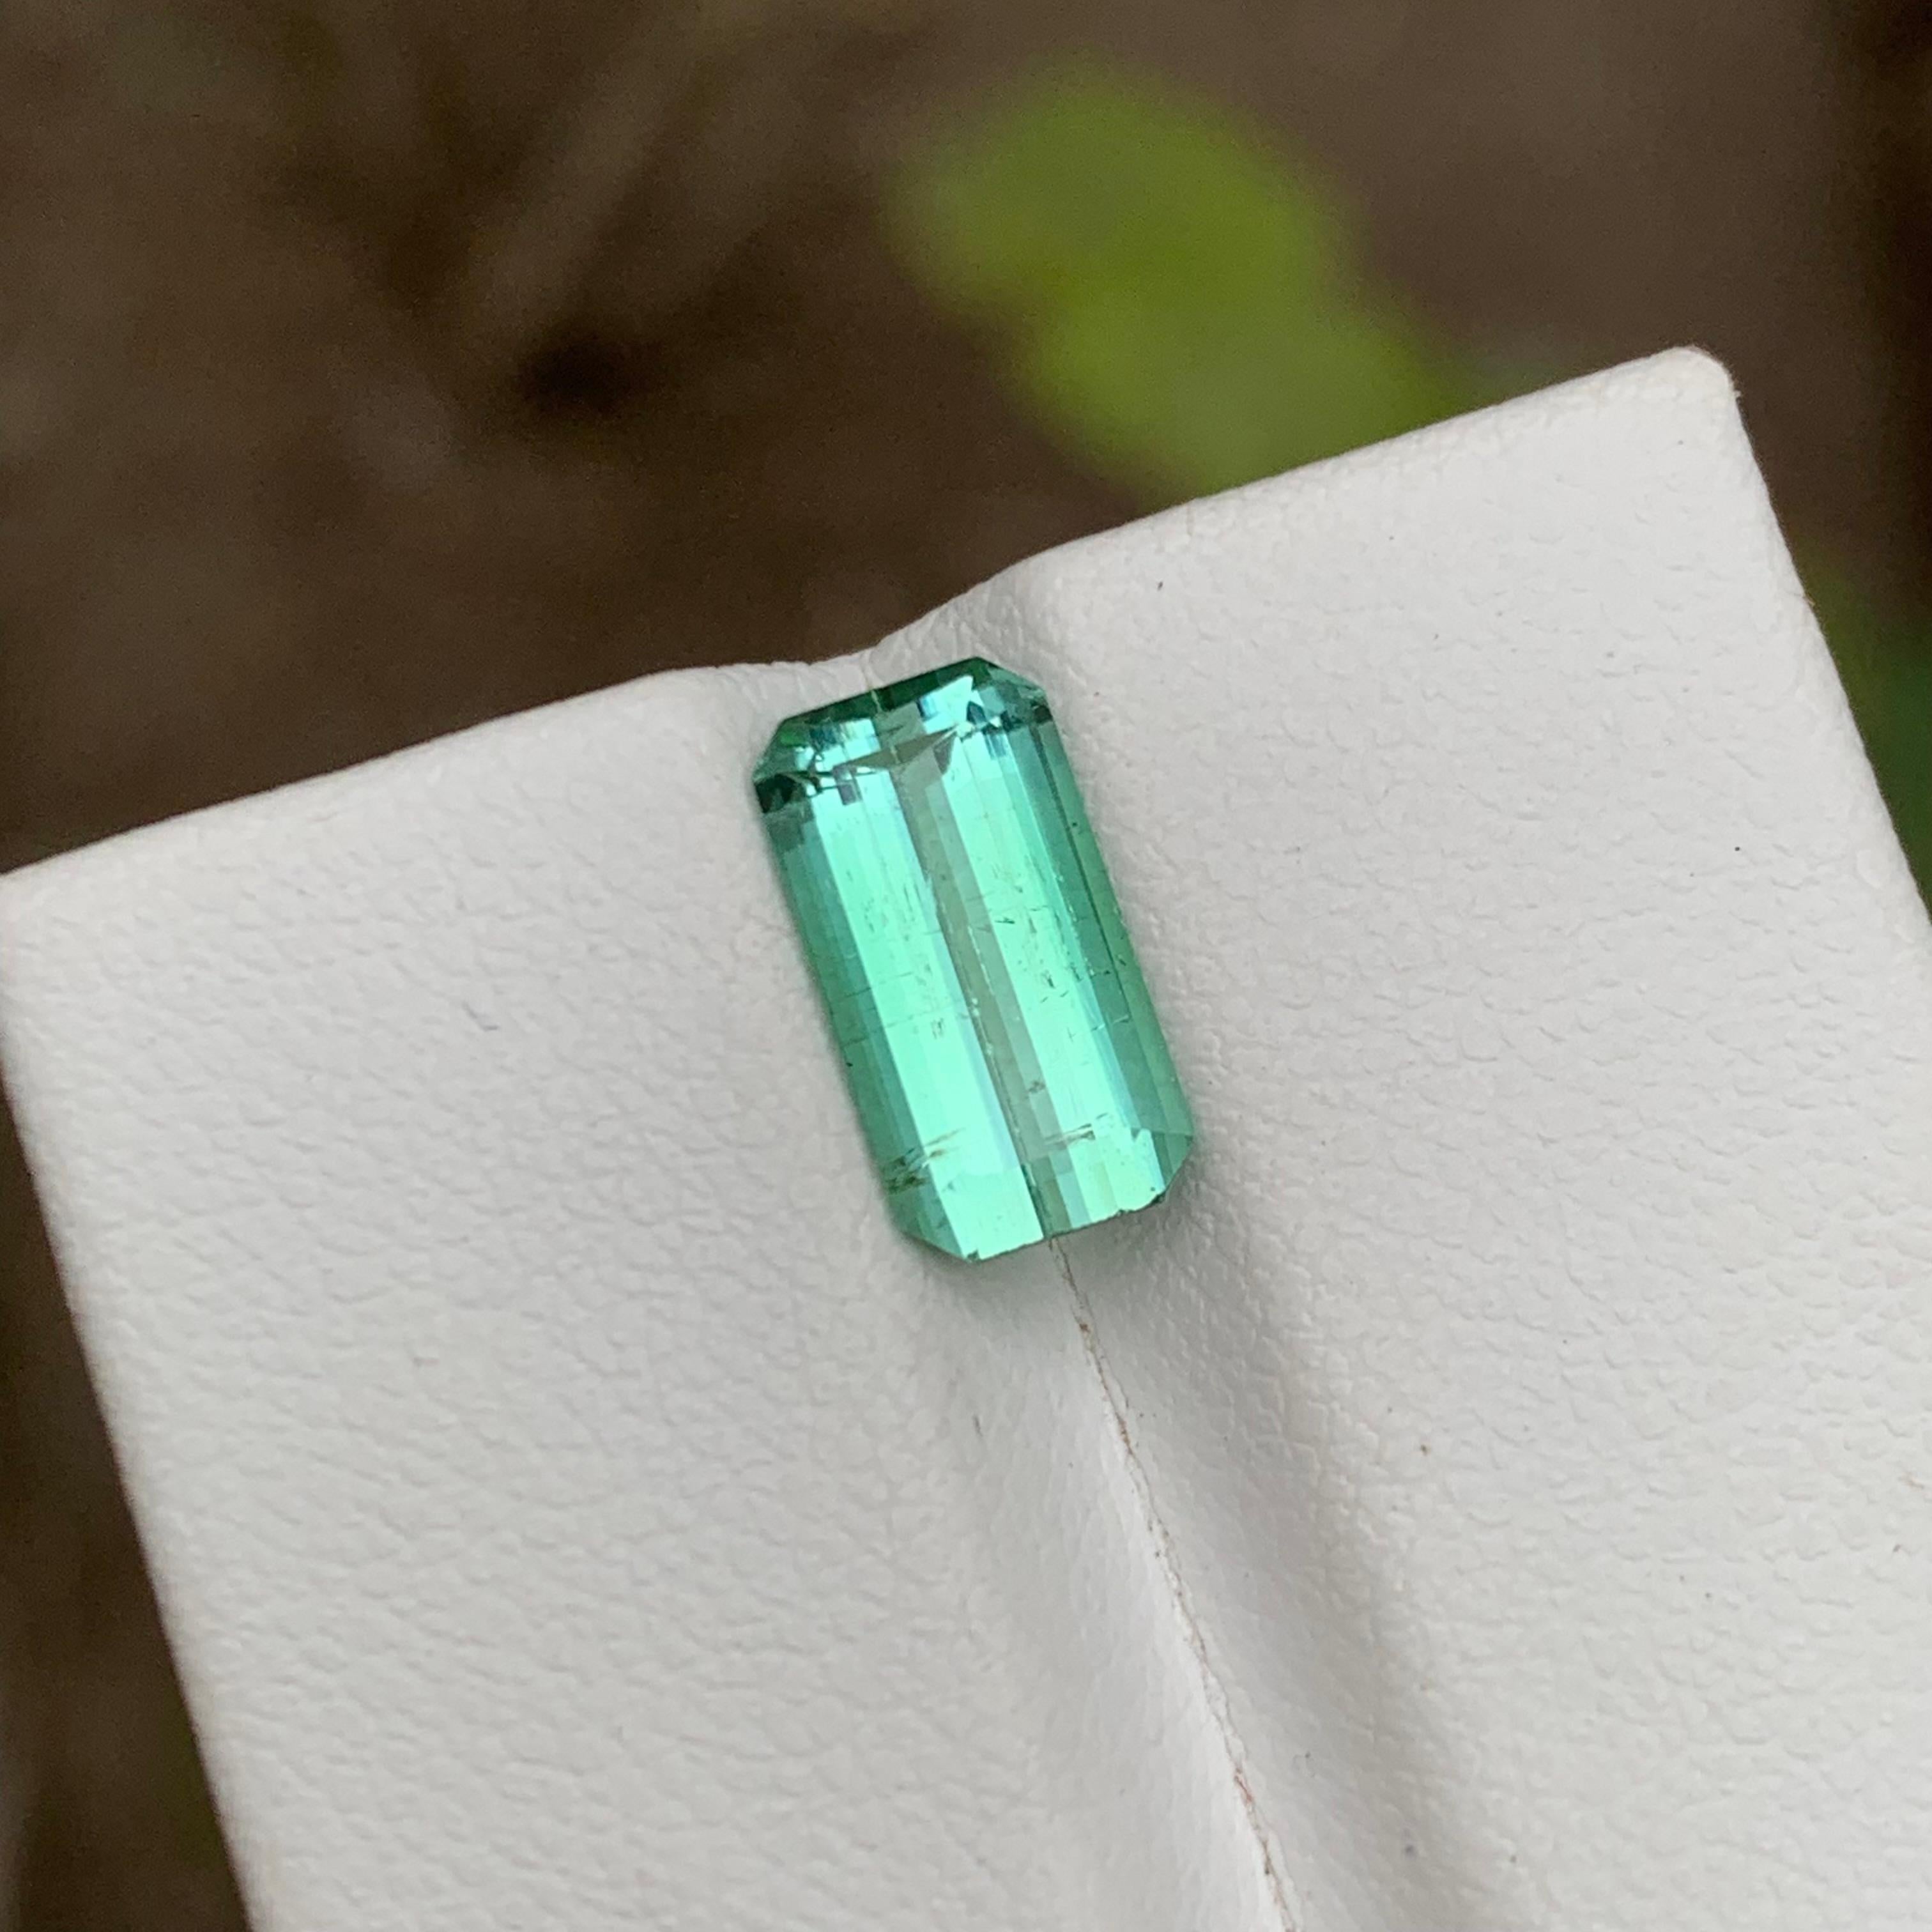 GEMSTONE TYPE: Tourmaline
PIECE(S): 1
WEIGHT: 2.70 Carats
SHAPE: Emerald Cut
SIZE (MM): 11.17 x 5.90 x 4.52
COLOR: light Bluish Green
CLARITY: Slightly Included 
TREATMENT: None
ORIGIN: Afghanistan
CERTIFICATE: On demand

Discover the epitome of